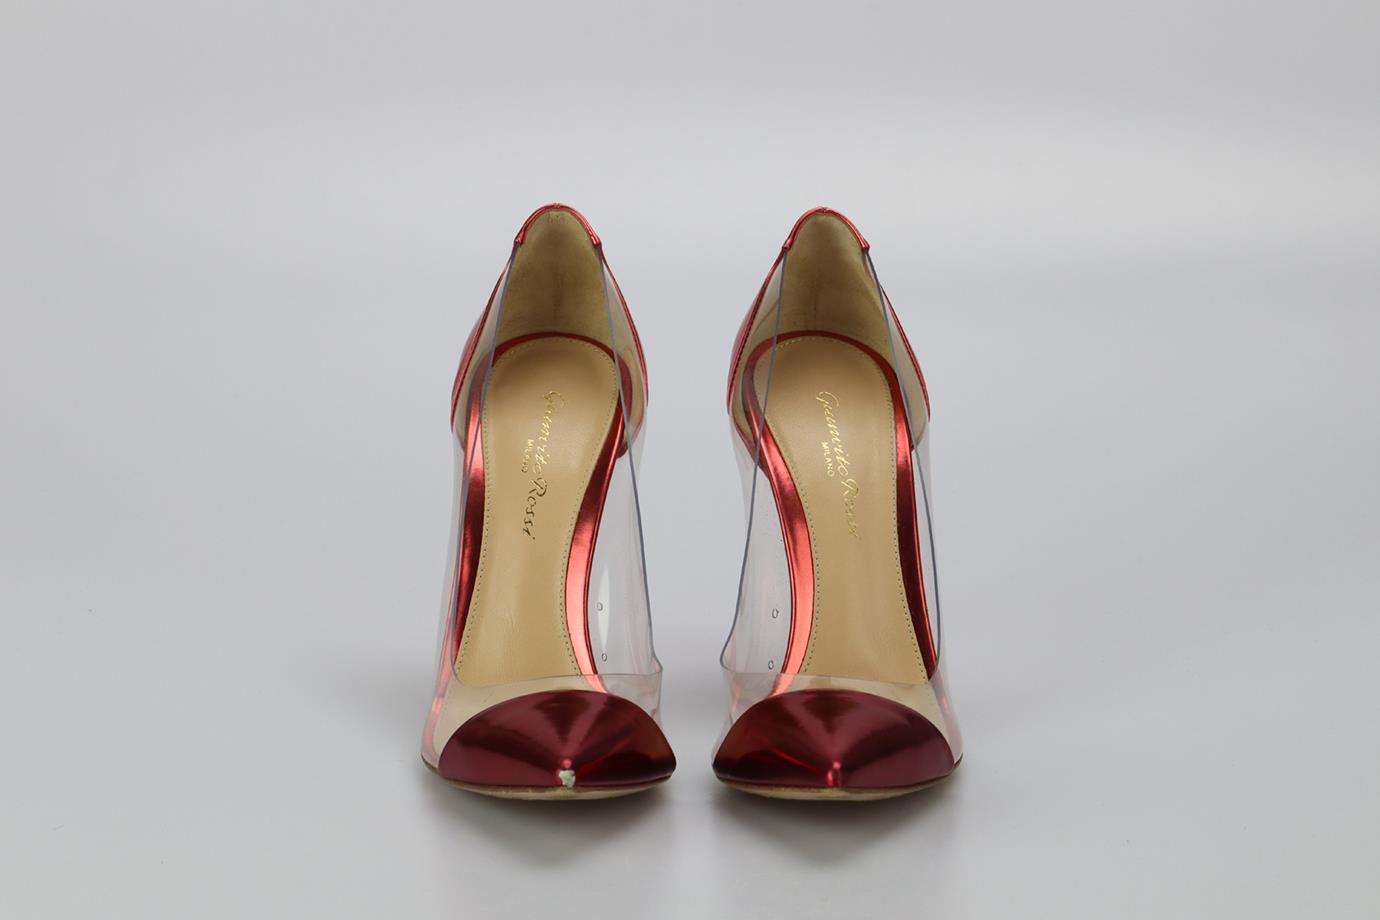 GIANVITO ROSSI PVC AND PATENT LEATHER PUMPS EU 37.5 UK 4.5 US 7.5